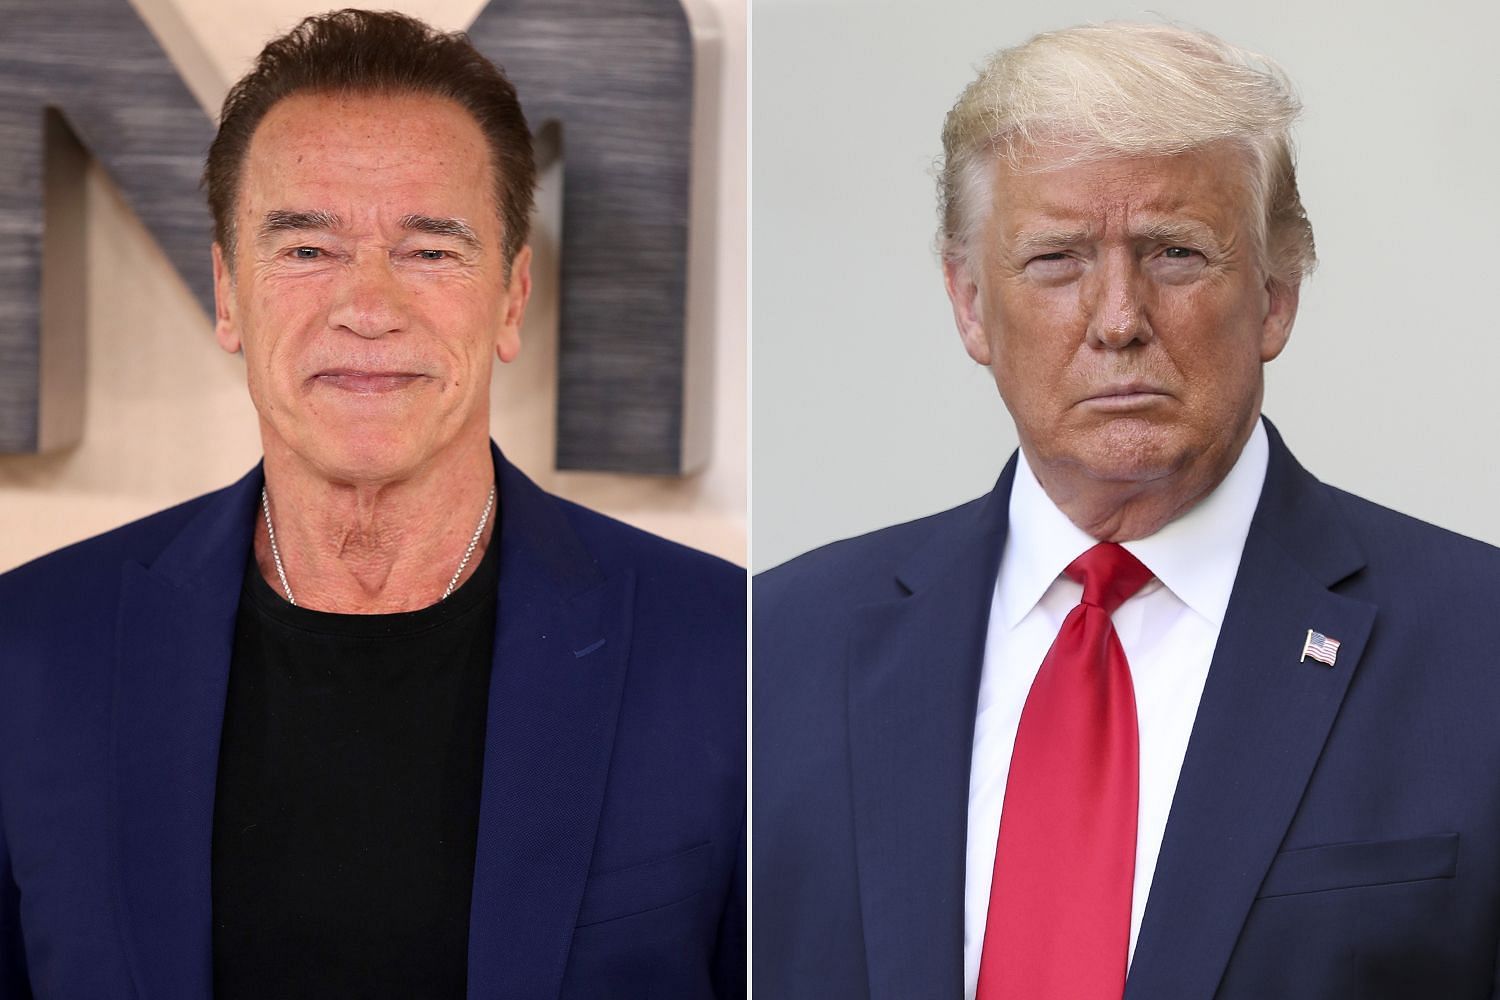 Arnold and Donald Trump (Image via Entertainment Weekly)